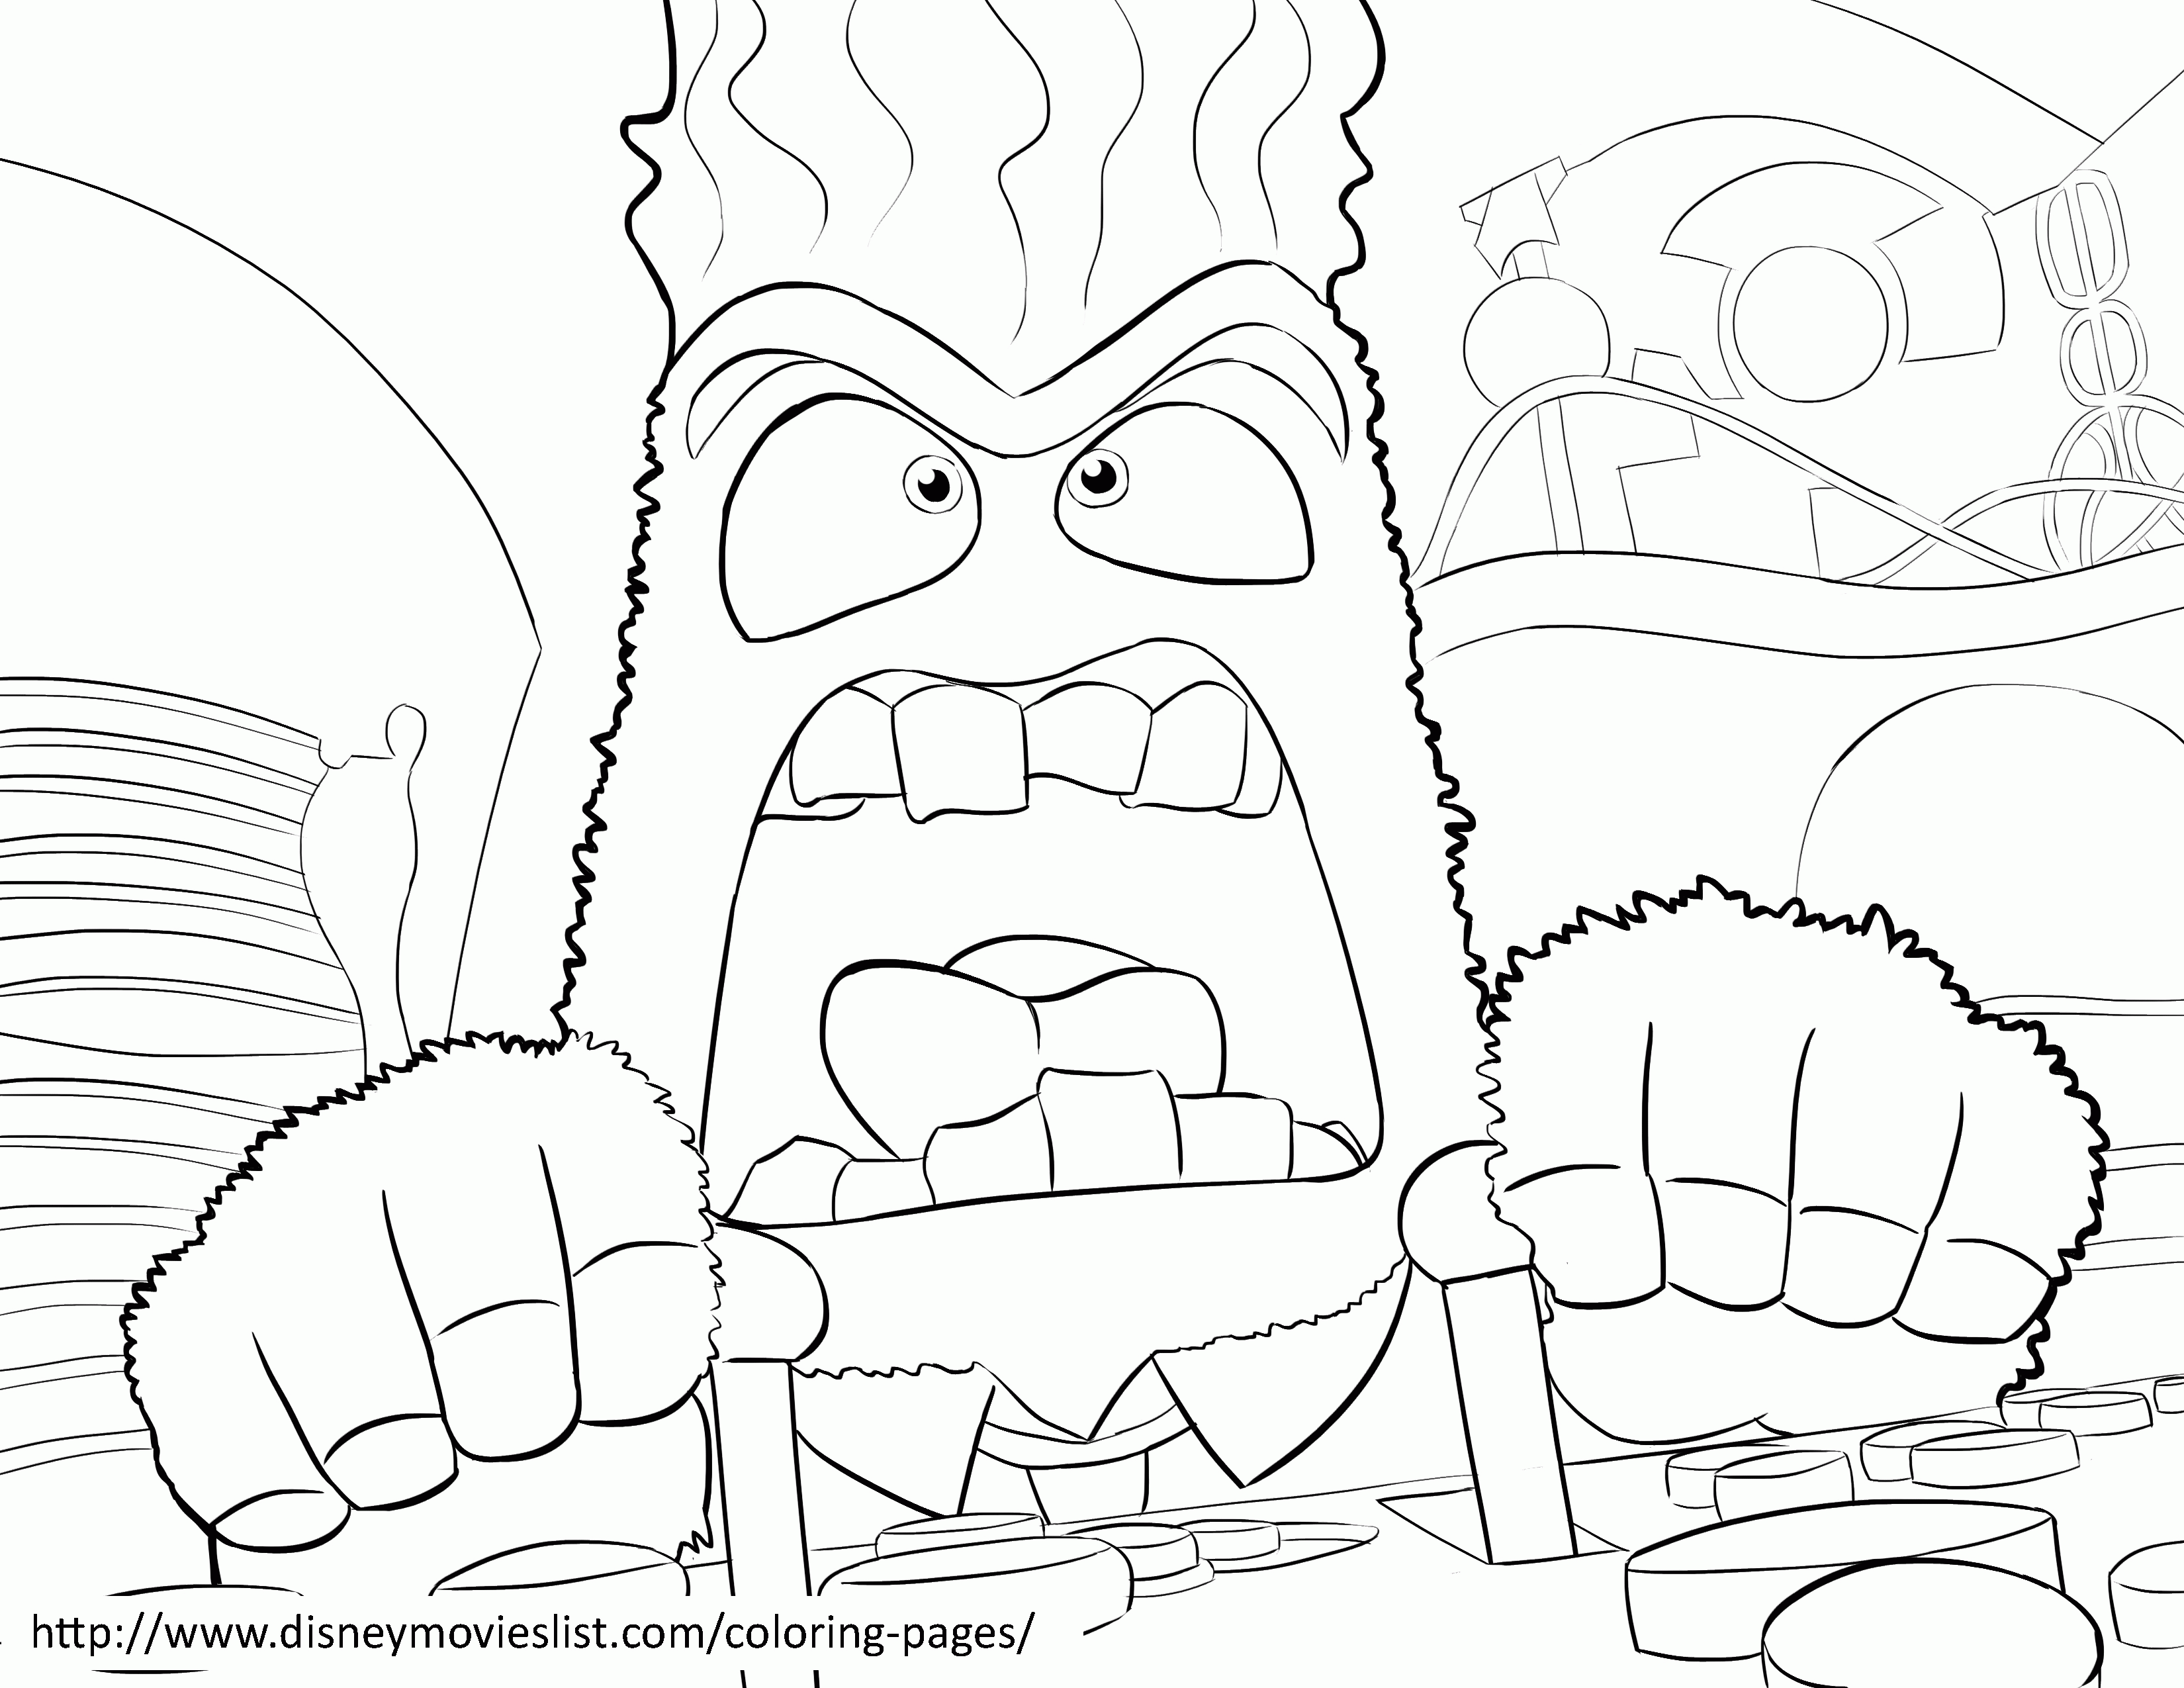 inside-out-coloring-page-0046-q1